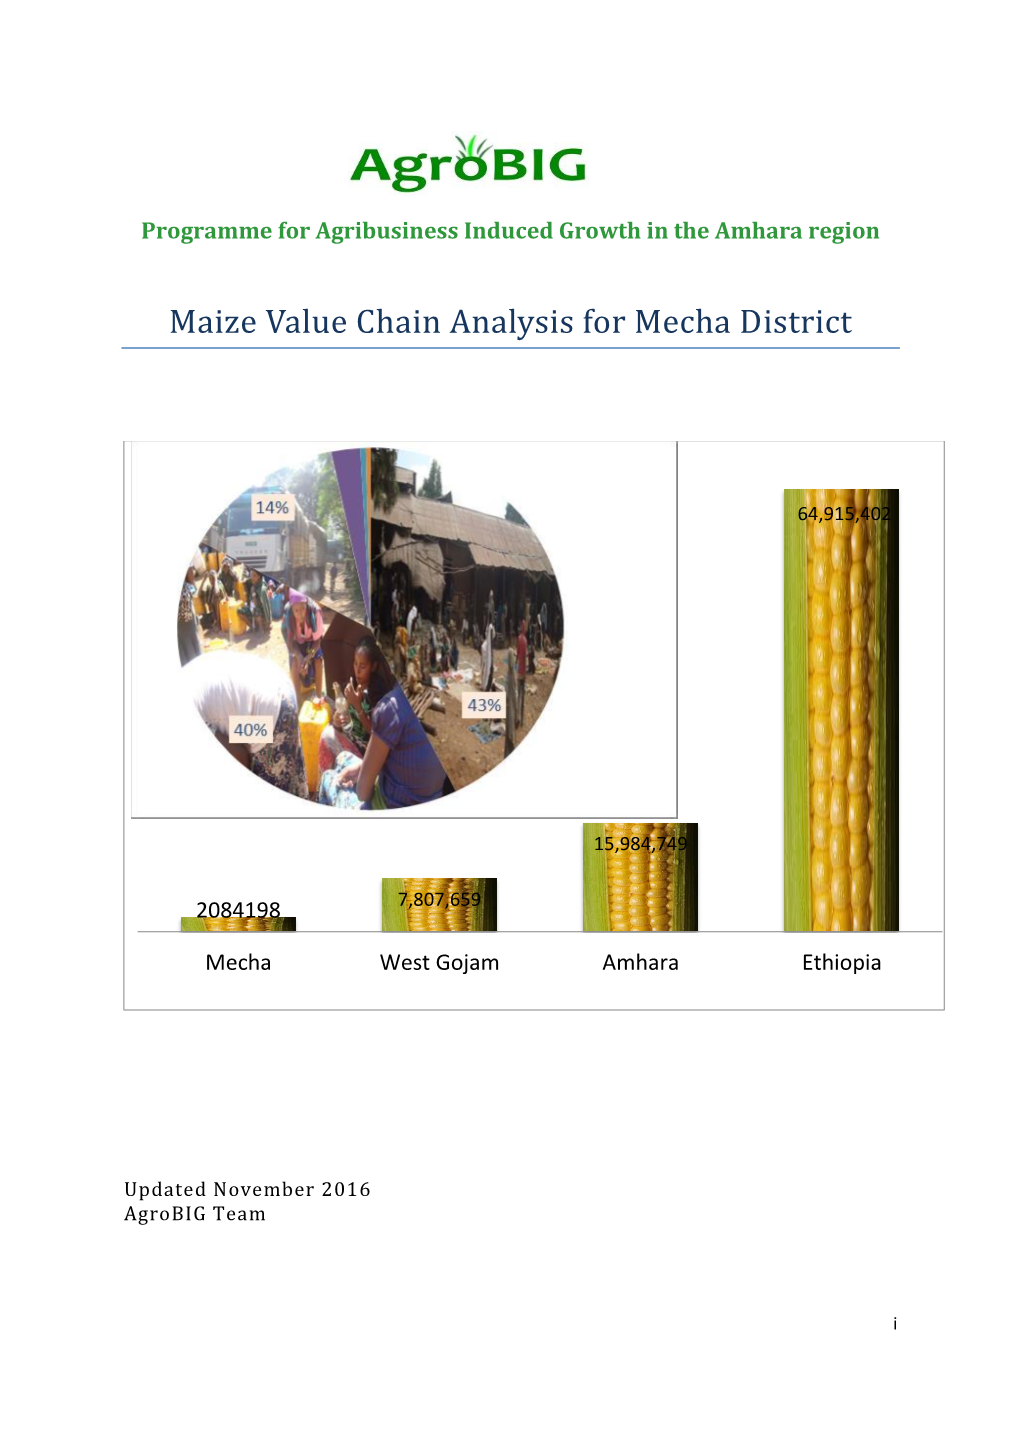 Maize Value Chain Analysis for Mecha District